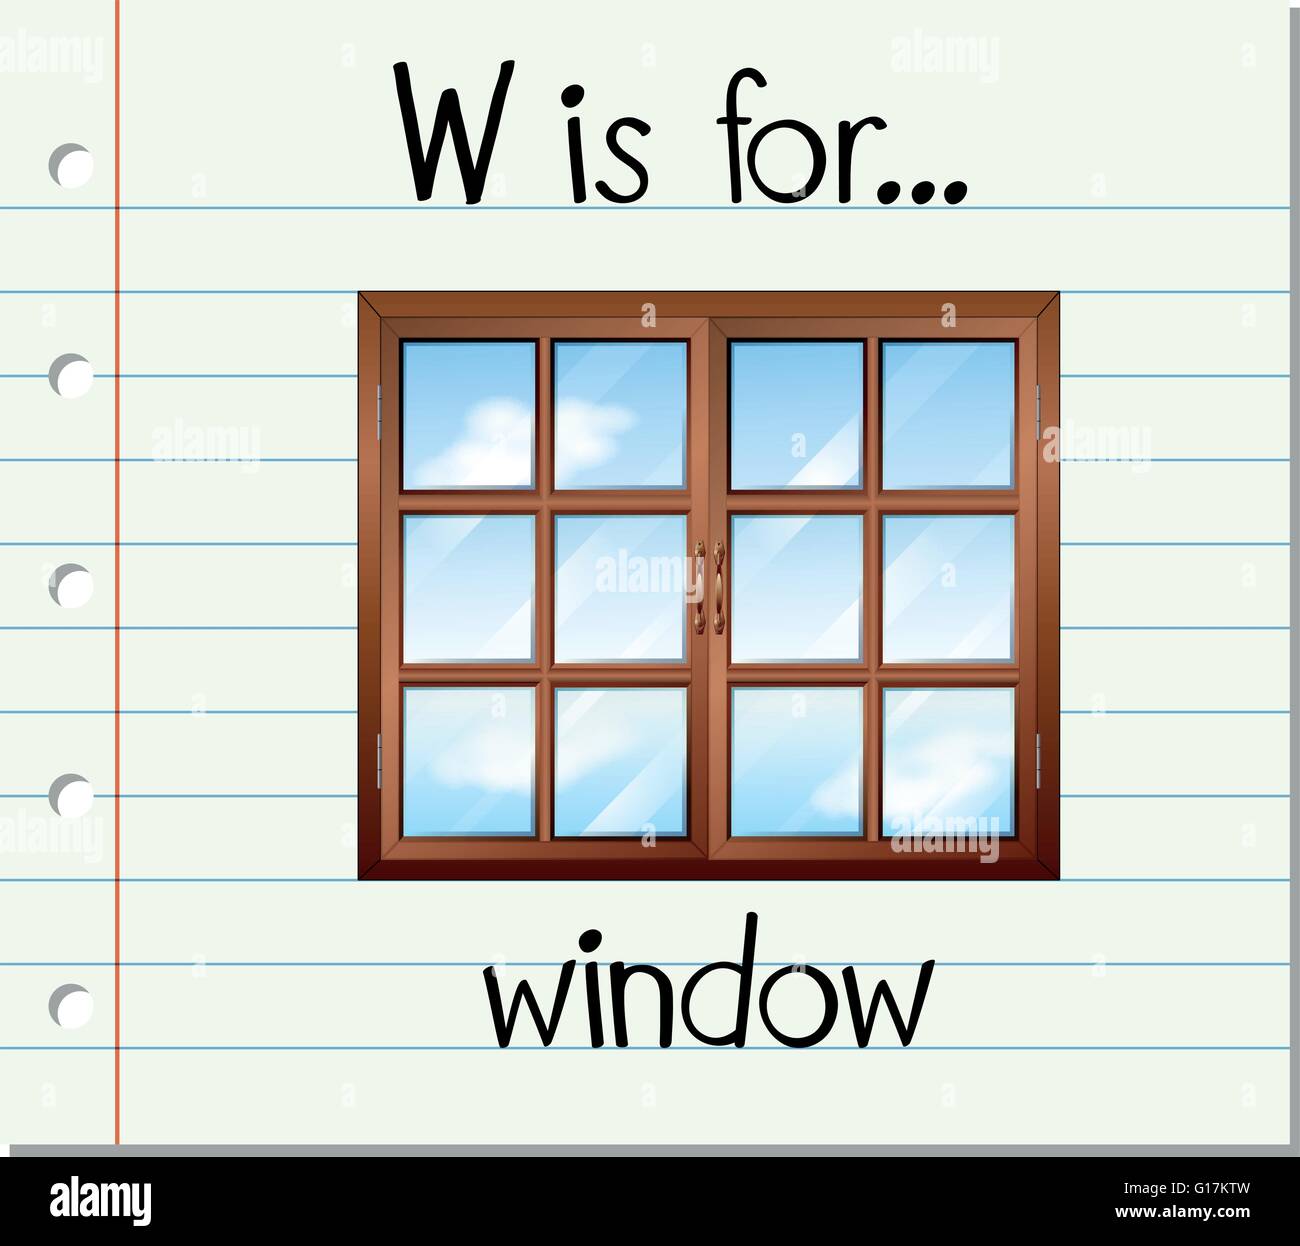 Flashcard letter W is for window illustration Stock Vector